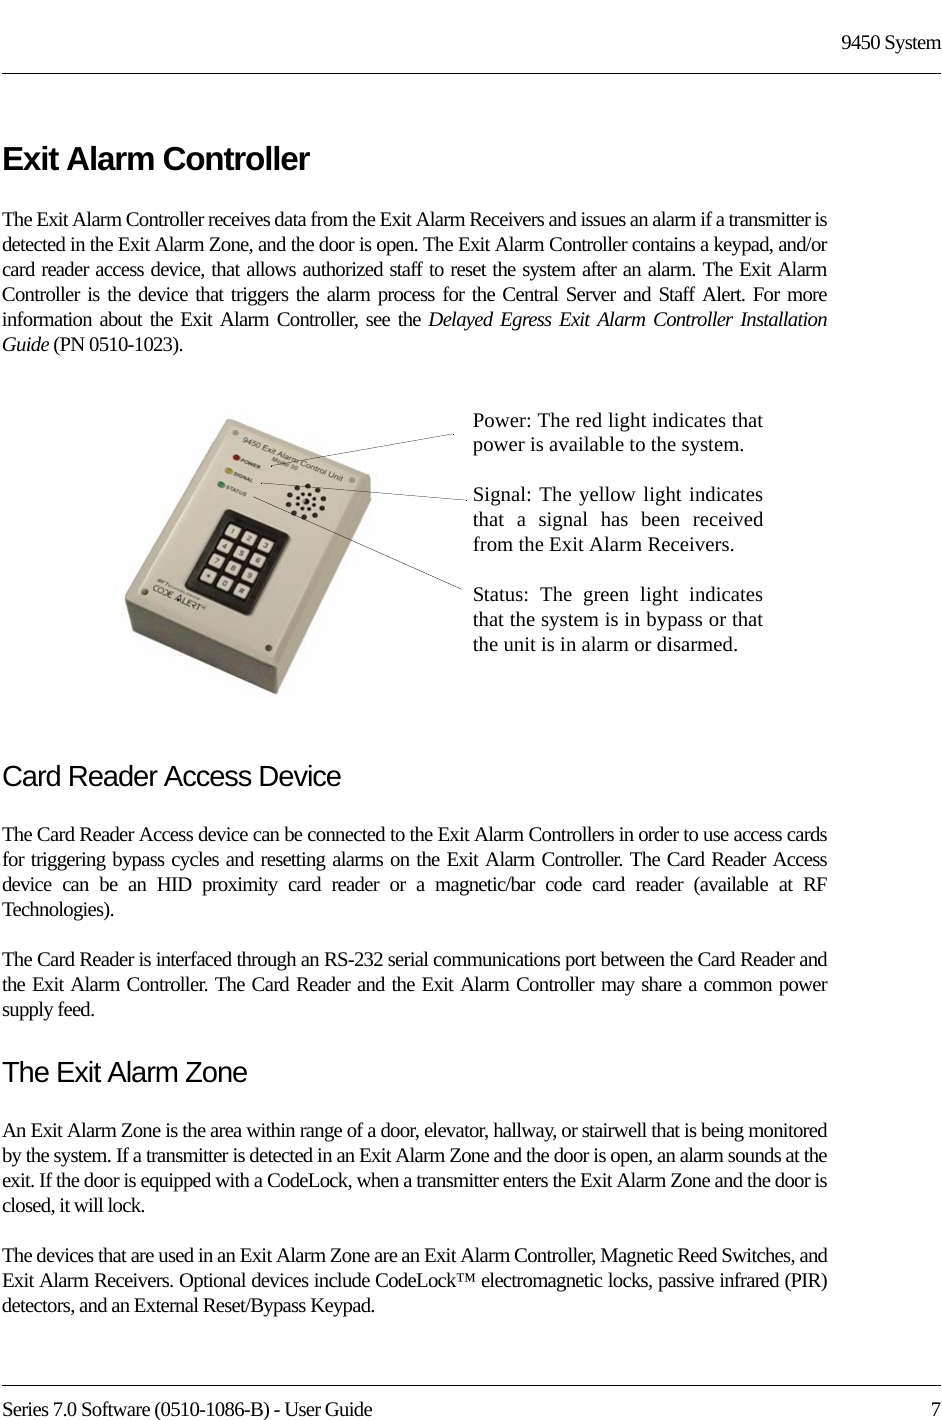 Series 7.0 Software (0510-1086-B) - User Guide  79450 SystemExit Alarm ControllerThe Exit Alarm Controller receives data from the Exit Alarm Receivers and issues an alarm if a transmitter is detected in the Exit Alarm Zone, and the door is open. The Exit Alarm Controller contains a keypad, and/or card reader access device, that allows authorized staff to reset the system after an alarm. The Exit Alarm Controller is the device that triggers the alarm process for the Central Server and Staff Alert. For more information about the Exit Alarm Controller, see the Delayed Egress Exit Alarm Controller Installation Guide (PN 0510-1023).Card Reader Access DeviceThe Card Reader Access device can be connected to the Exit Alarm Controllers in order to use access cards for triggering bypass cycles and resetting alarms on the Exit Alarm Controller. The Card Reader Access device can be an HID proximity card reader or a magnetic/bar code card reader (available at RF Technologies). The Card Reader is interfaced through an RS-232 serial communications port between the Card Reader and the Exit Alarm Controller. The Card Reader and the Exit Alarm Controller may share a common power supply feed.The Exit Alarm ZoneAn Exit Alarm Zone is the area within range of a door, elevator, hallway, or stairwell that is being monitored by the system. If a transmitter is detected in an Exit Alarm Zone and the door is open, an alarm sounds at the exit. If the door is equipped with a CodeLock, when a transmitter enters the Exit Alarm Zone and the door is closed, it will lock.The devices that are used in an Exit Alarm Zone are an Exit Alarm Controller, Magnetic Reed Switches, and Exit Alarm Receivers. Optional devices include CodeLock™ electromagnetic locks, passive infrared (PIR) detectors, and an External Reset/Bypass Keypad.Power: The red light indicates that power is available to the system.Signal: The yellow light indicates that a signal has been received from the Exit Alarm Receivers.Status: The green light indicates that the system is in bypass or that the unit is in alarm or disarmed. 